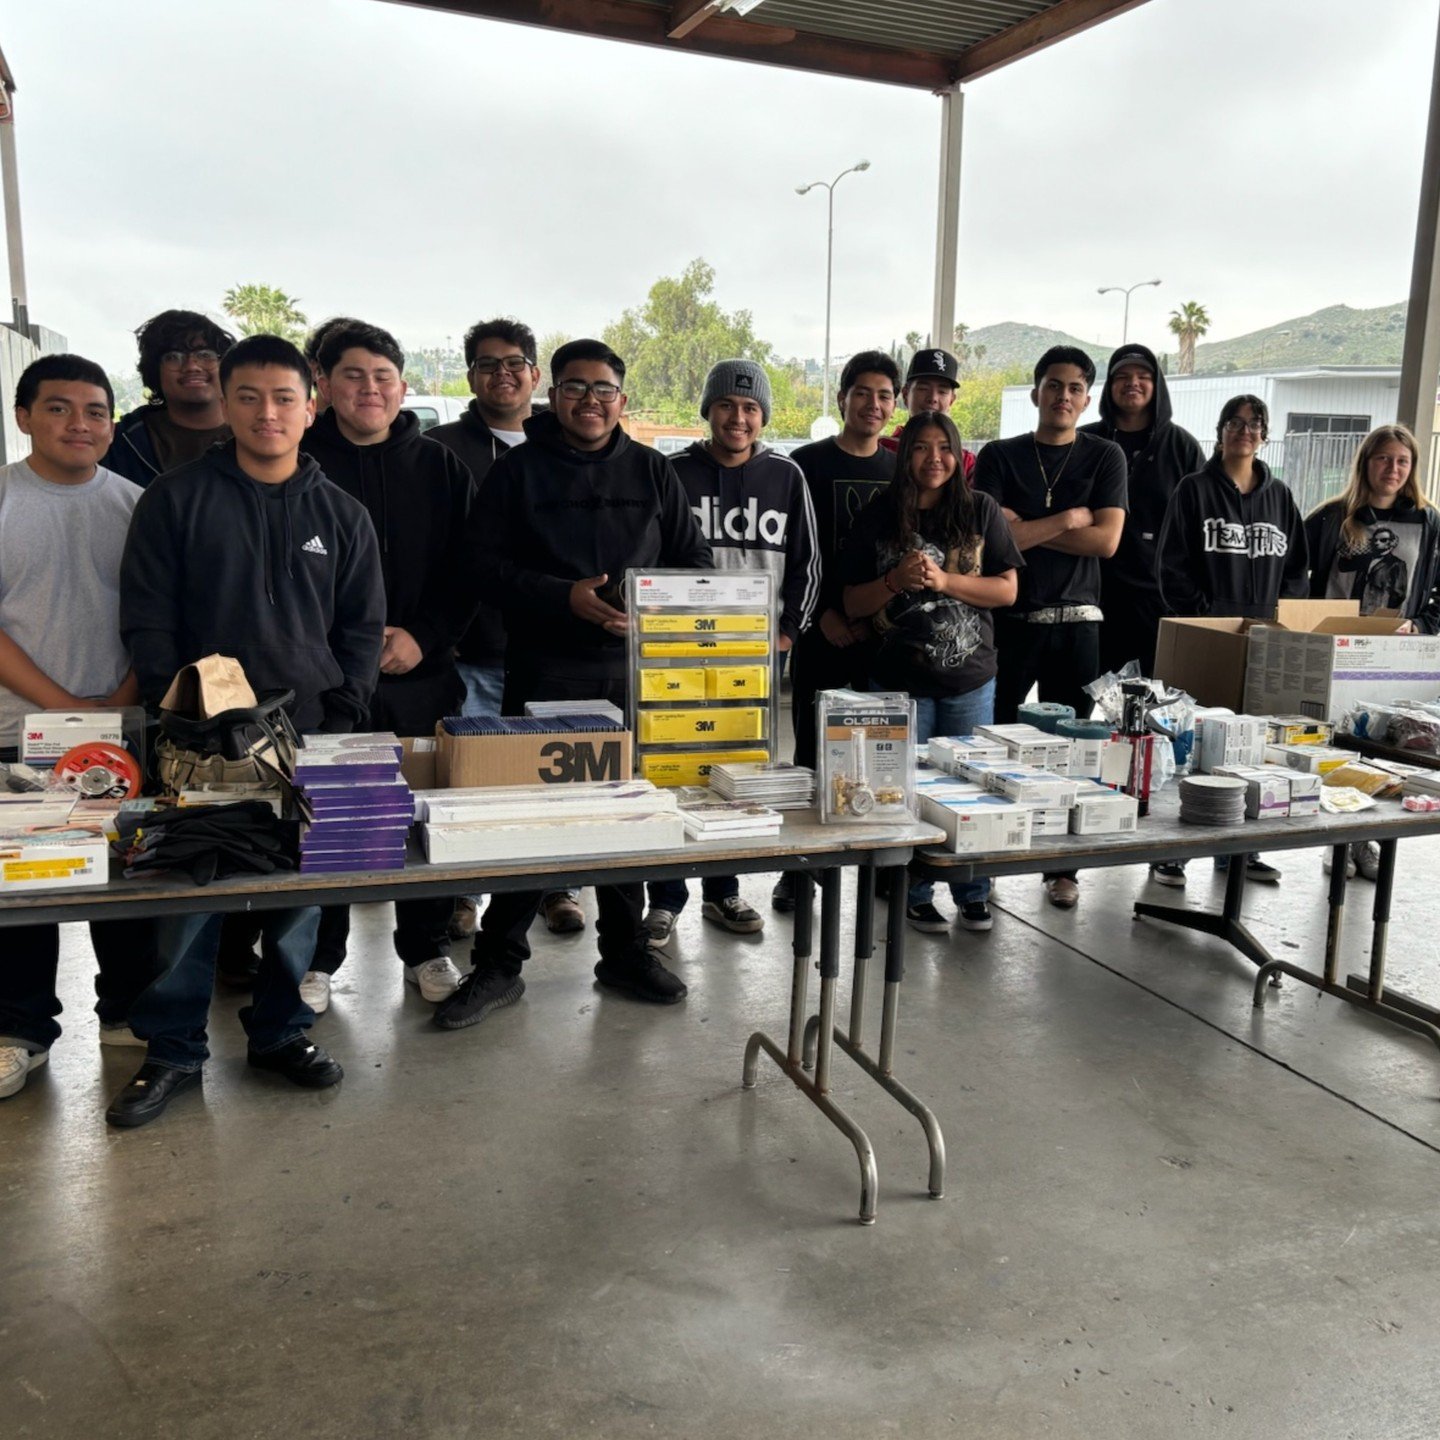 Shout out to @3mcollision for donating a massive amount of product to our CTE Auto Paint and Refinishing classes. Thank you for supporting the next generation of car enthusiasts!

@jusd_cte @rubidoux_jusd